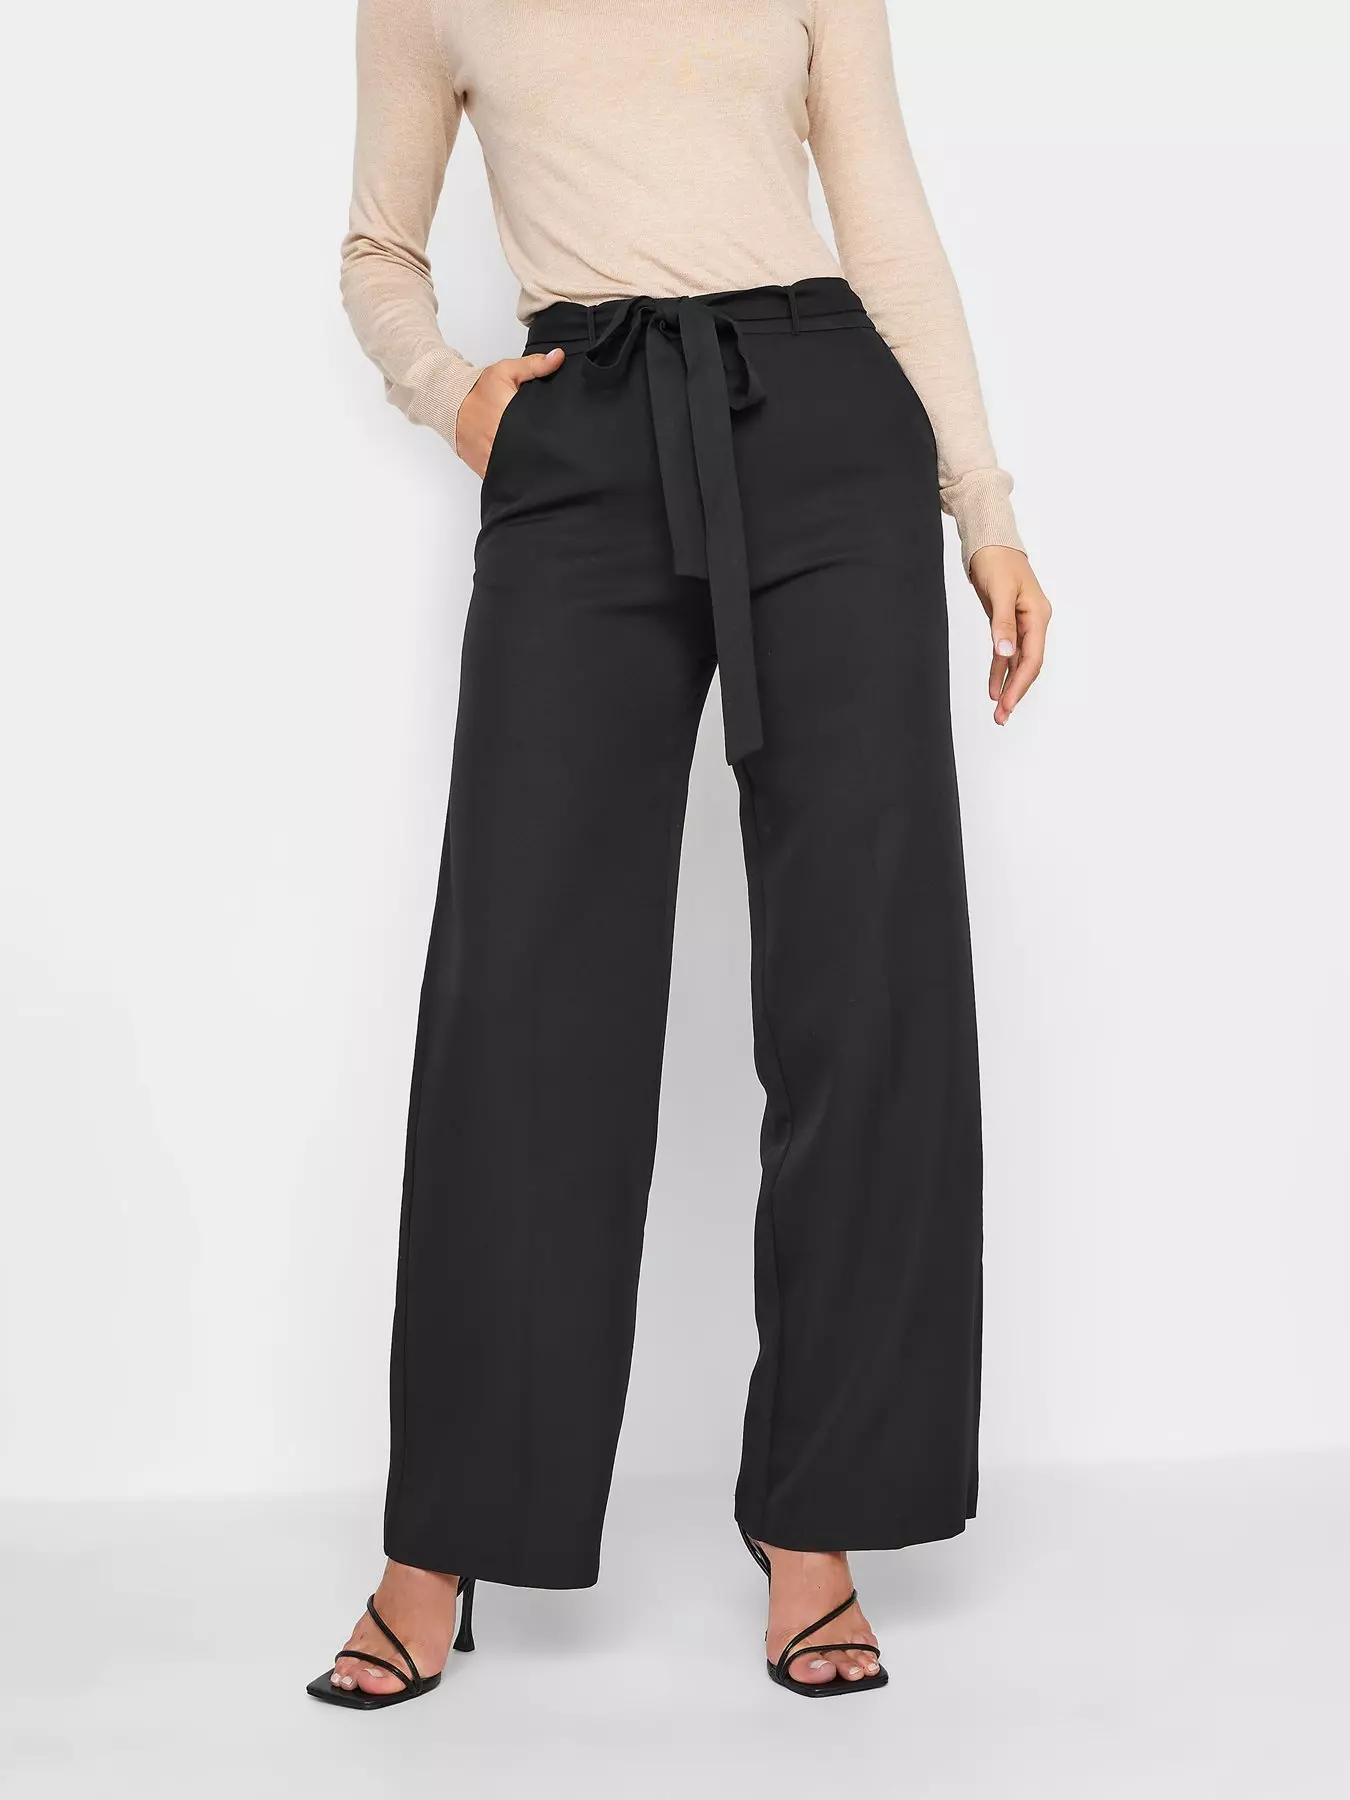 Long Tall Sally Ponte Trouser With Tie Waist 36inch - Black